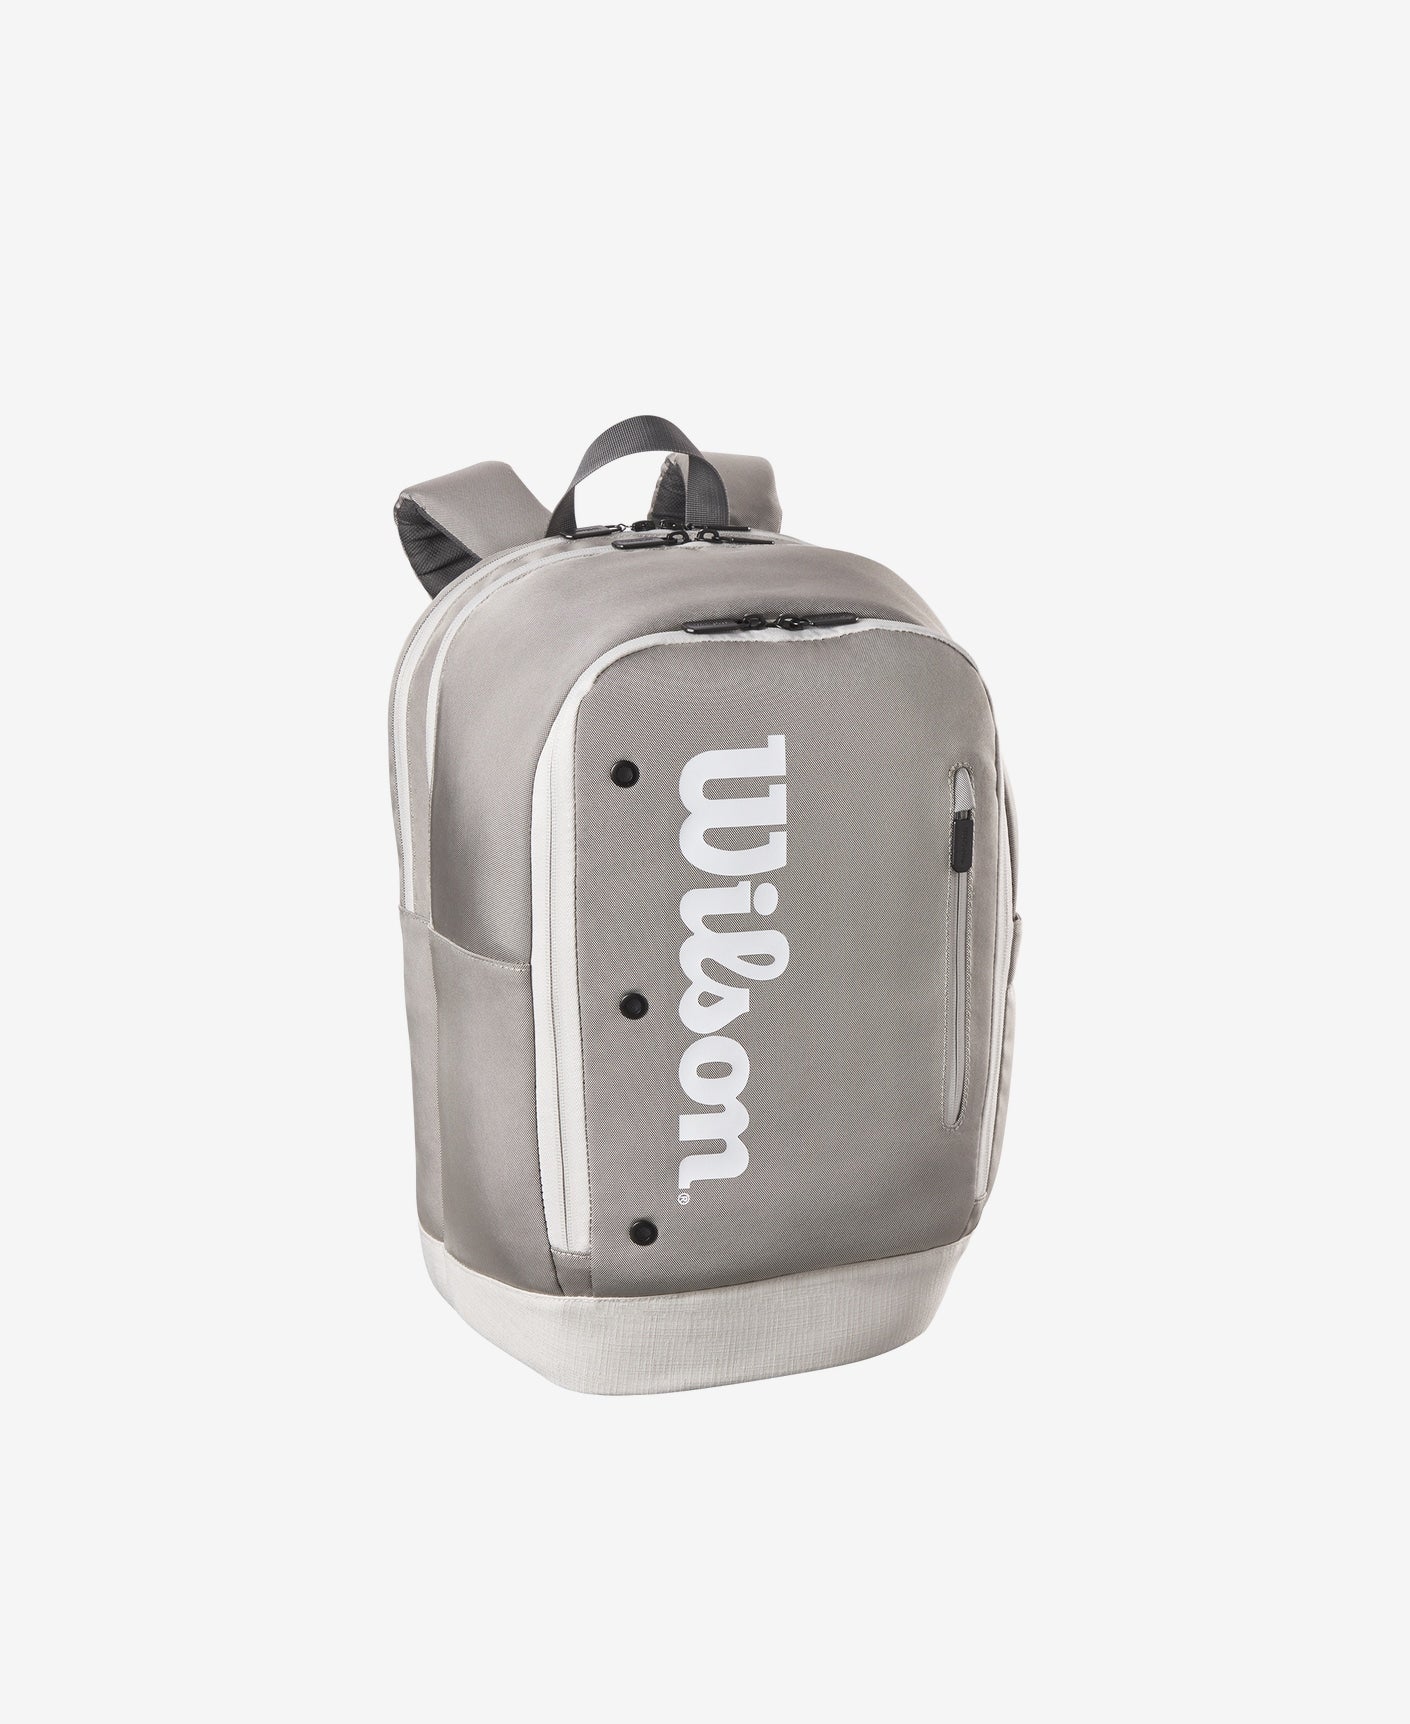 Wilson Tour Tennis Backpack in Stone Color